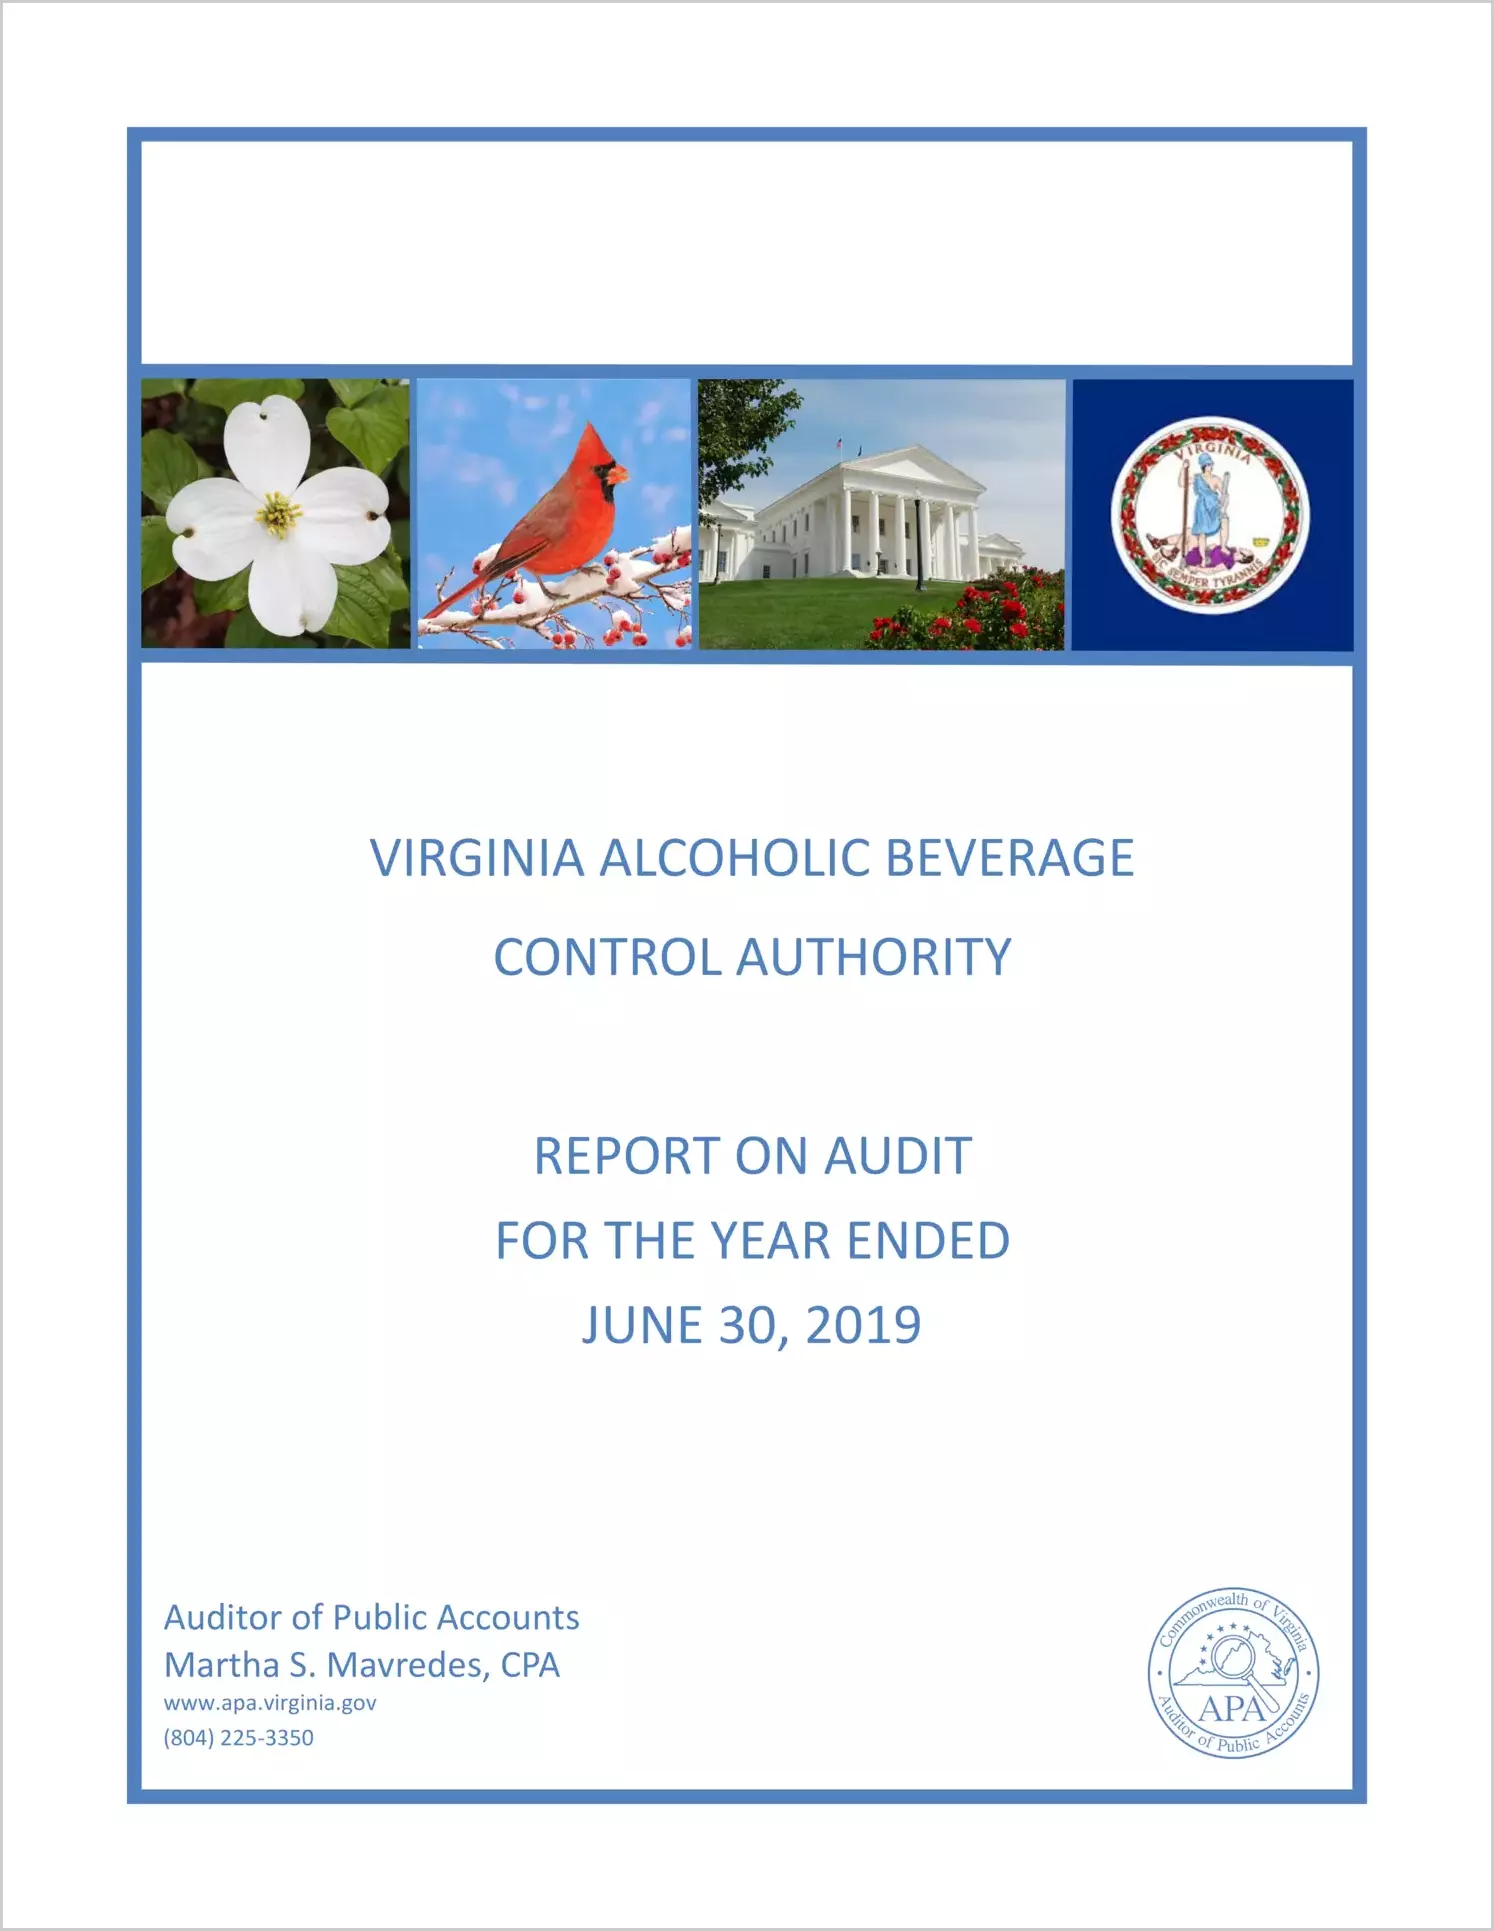 Virginia Alcoholic Beverage Control Authority for the year ended June 30, 2019